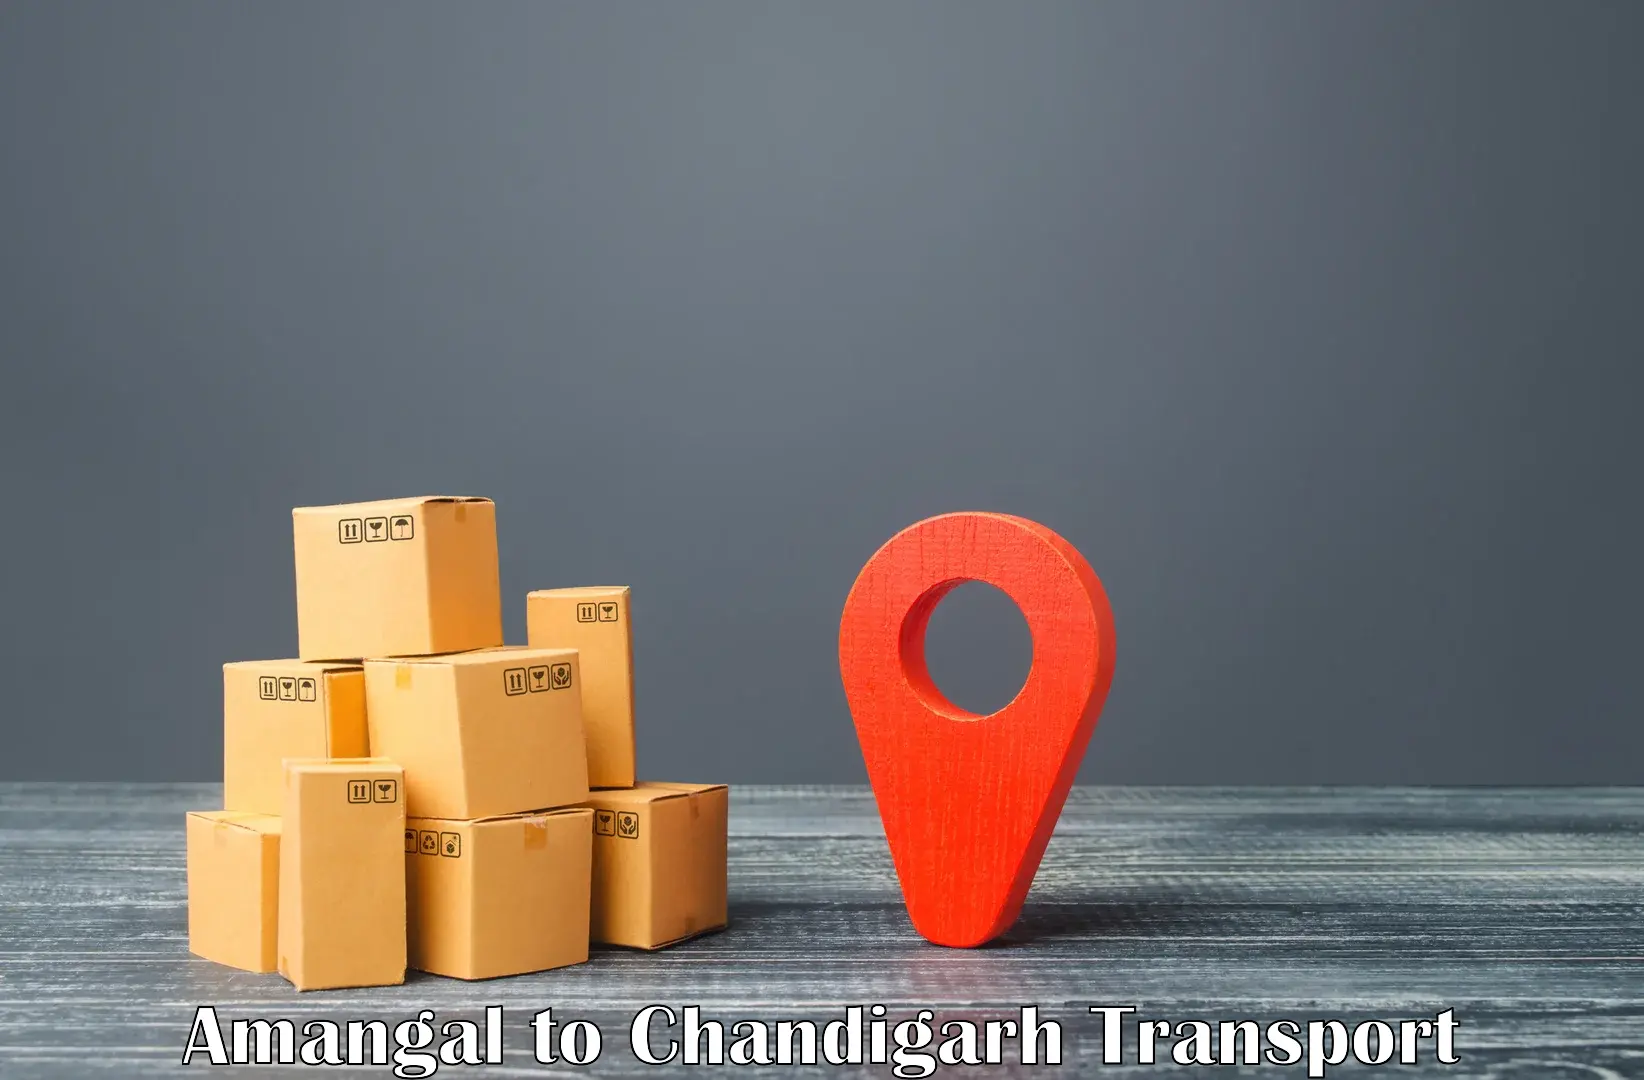 Nearby transport service in Amangal to Chandigarh